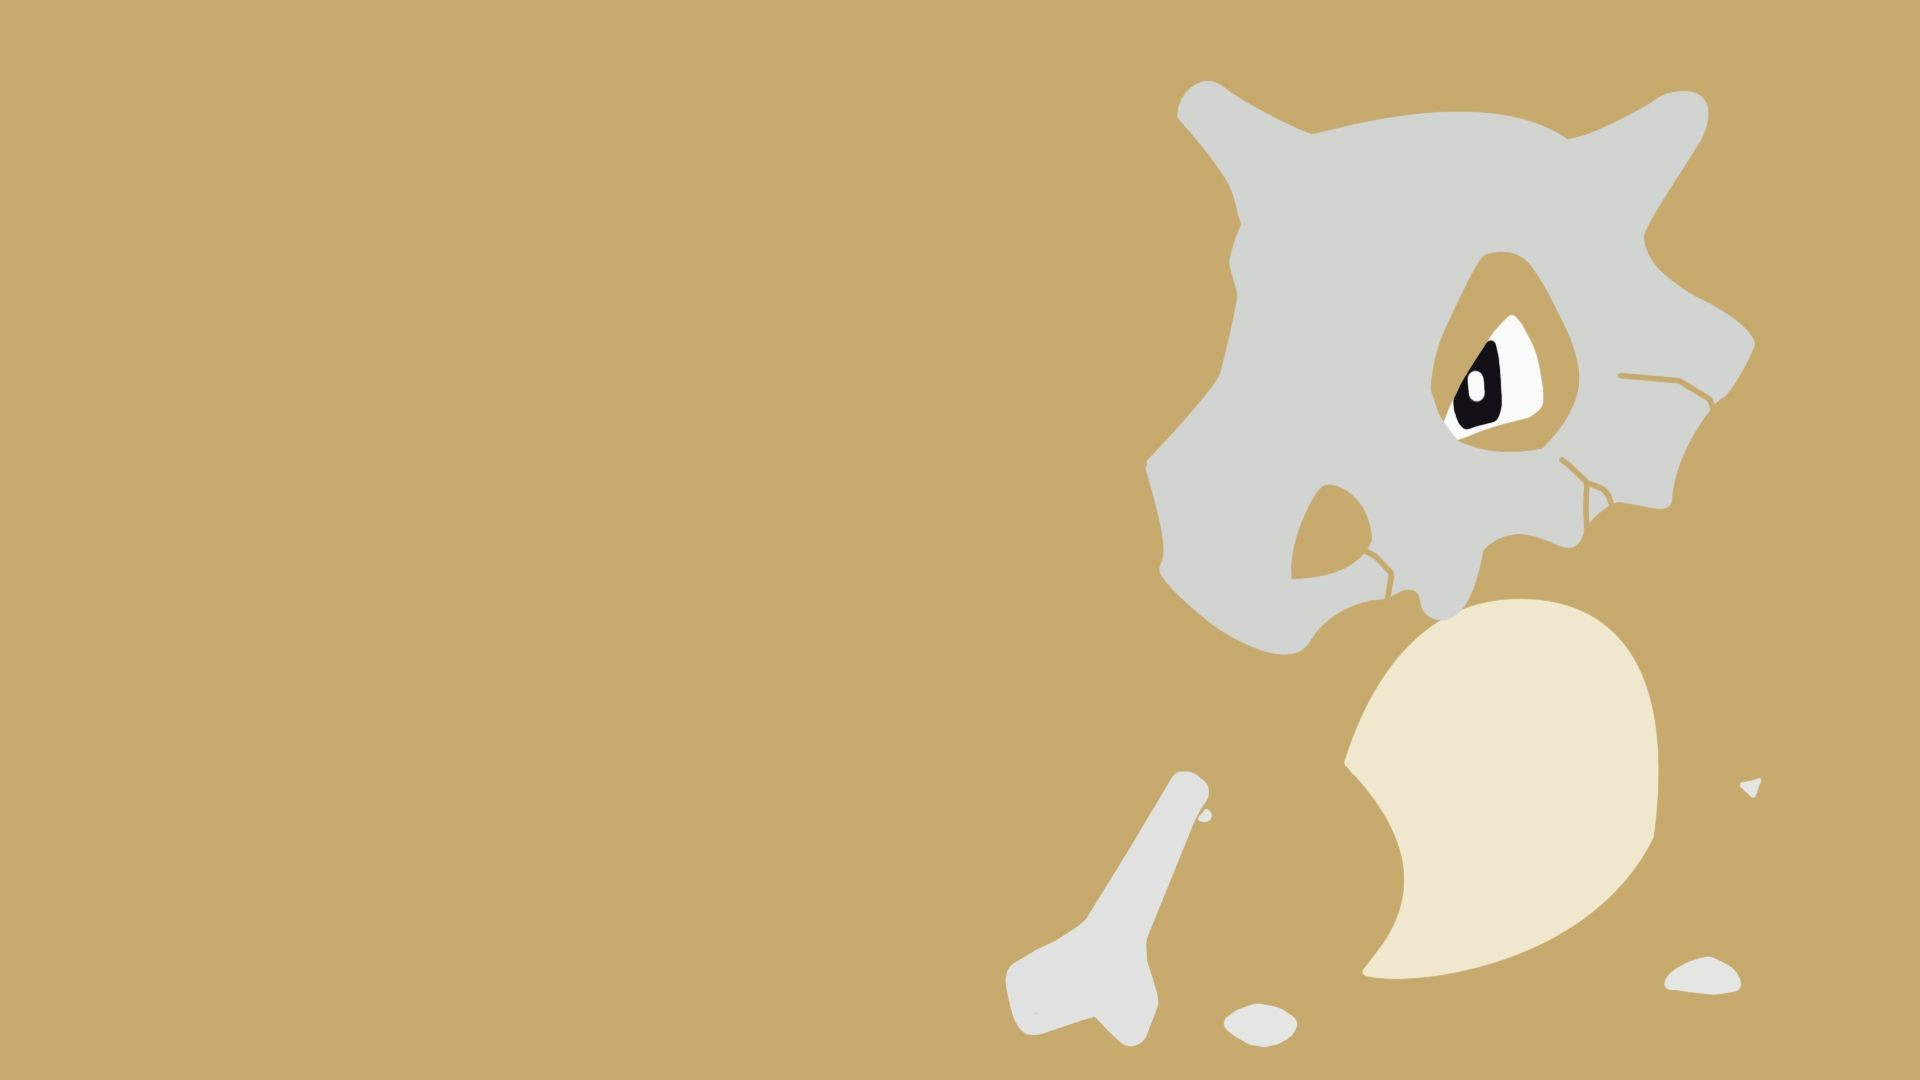 Cubone Pokémon wallpapers for desktop download free Cubone Pokémon  pictures and backgrounds for PC  moborg